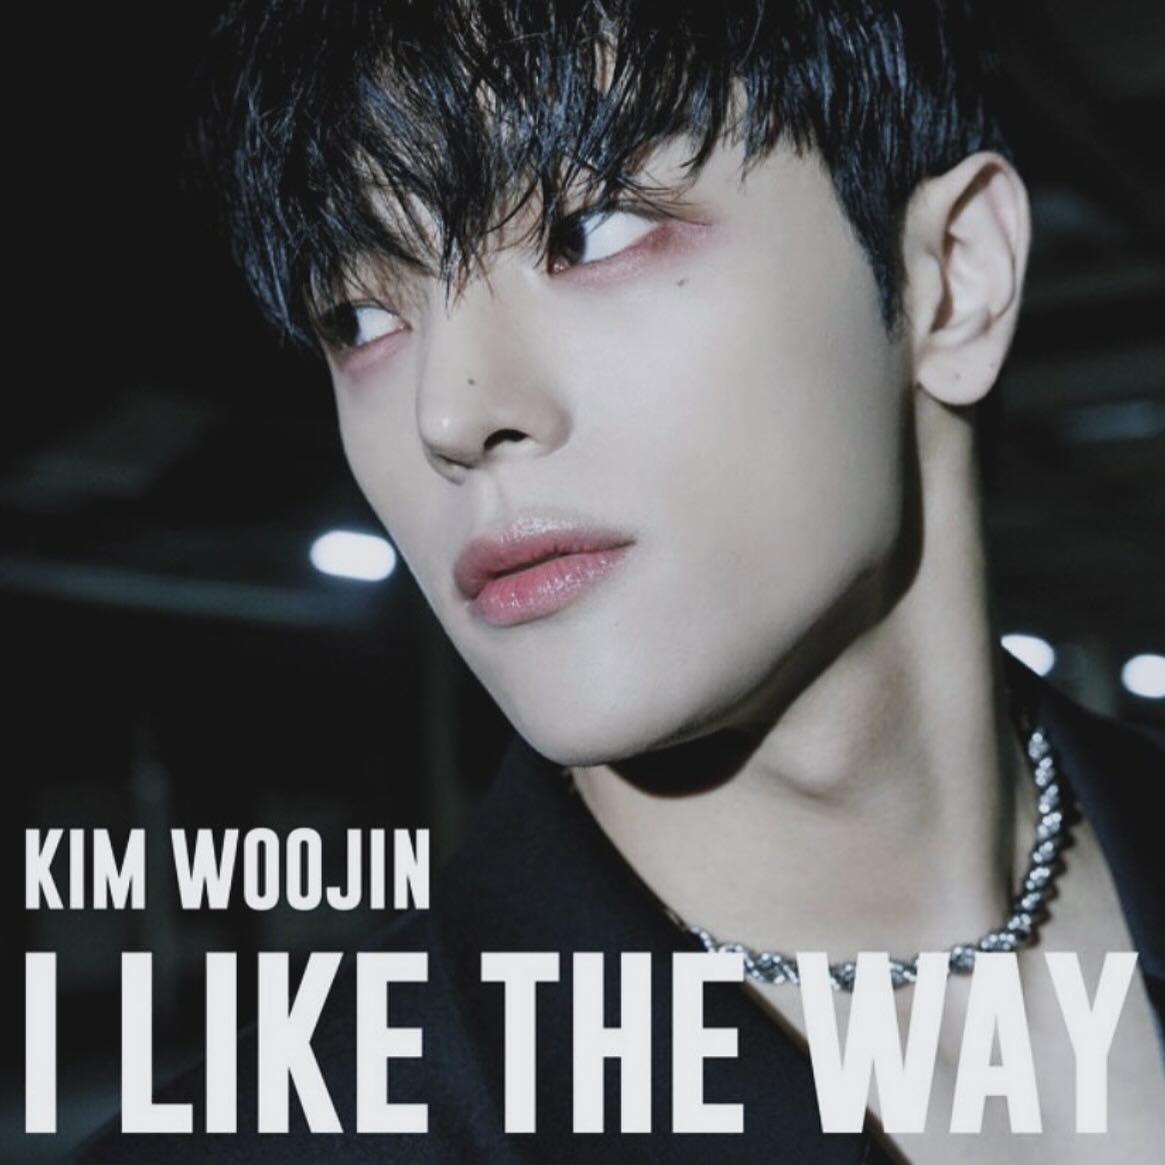 &ldquo;I LIKE THE WAY&rdquo; by Kim Woojin out now! Co-written by @kannertime